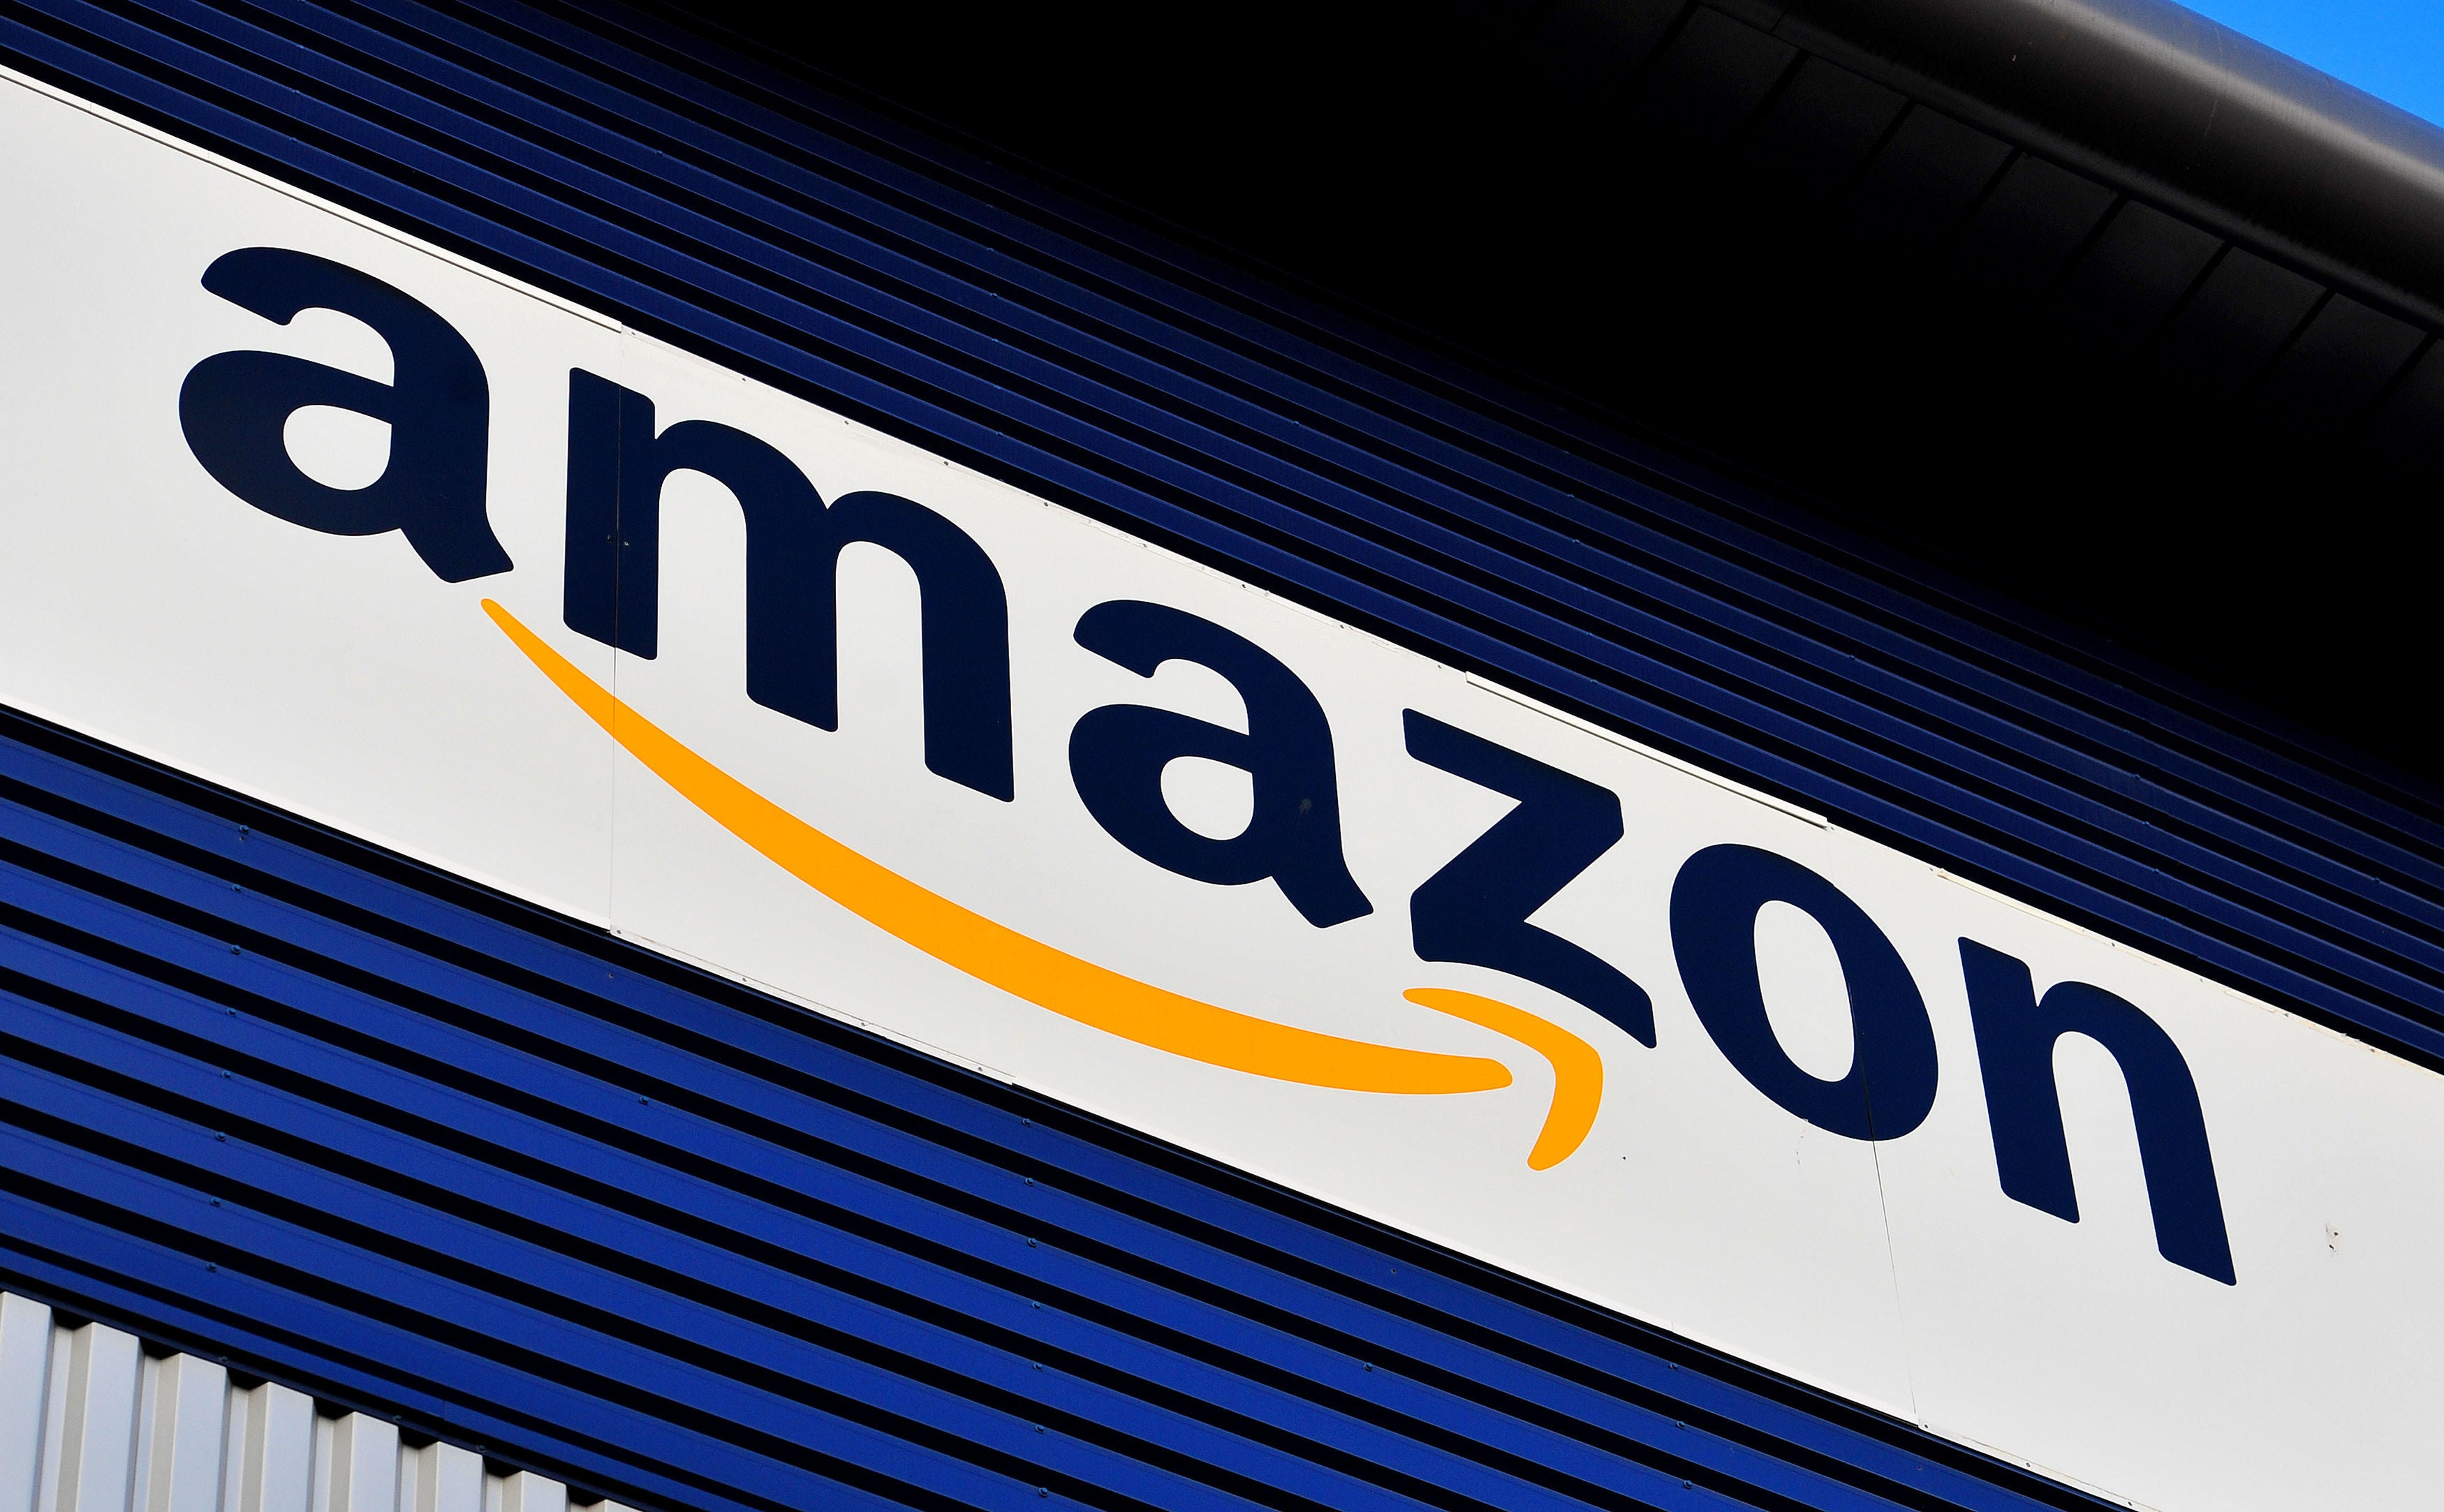 Amazon’s sales in the UK rose by 64 per cent in 2020